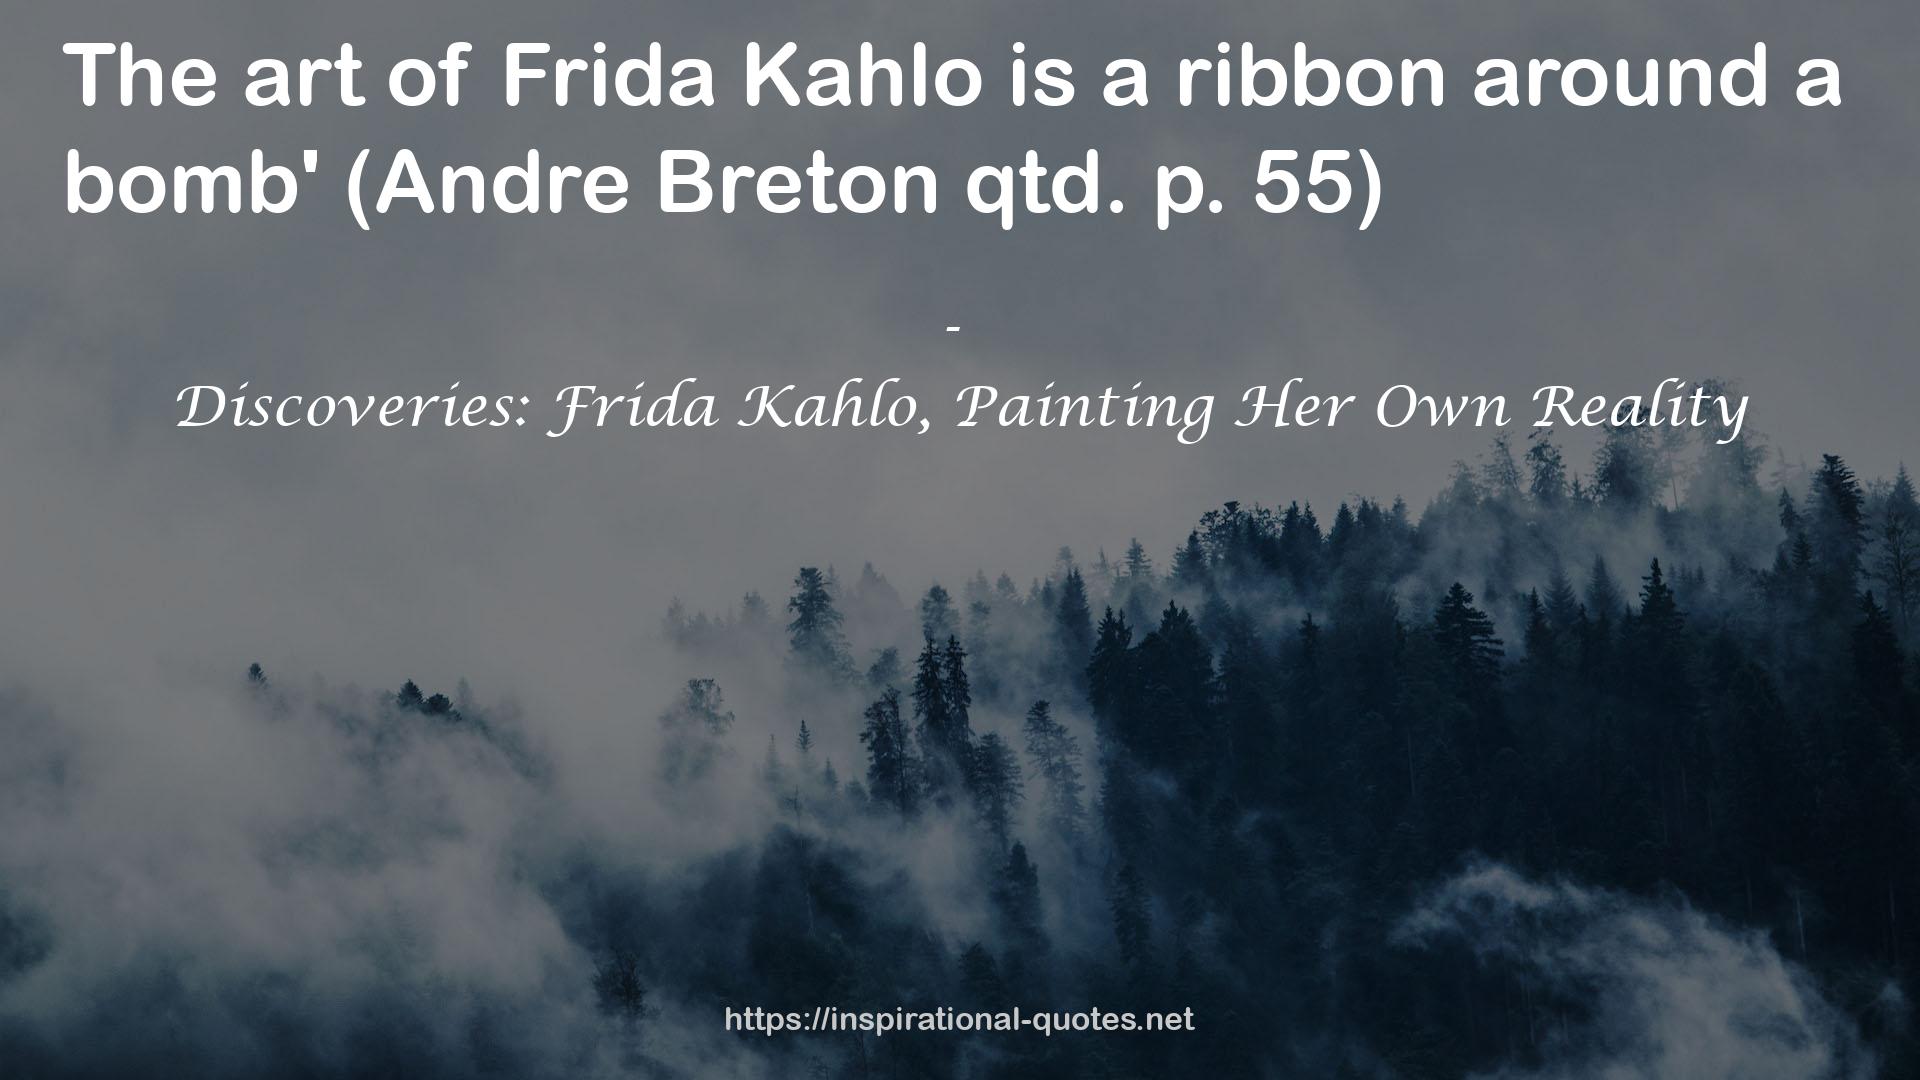 Discoveries: Frida Kahlo, Painting Her Own Reality QUOTES